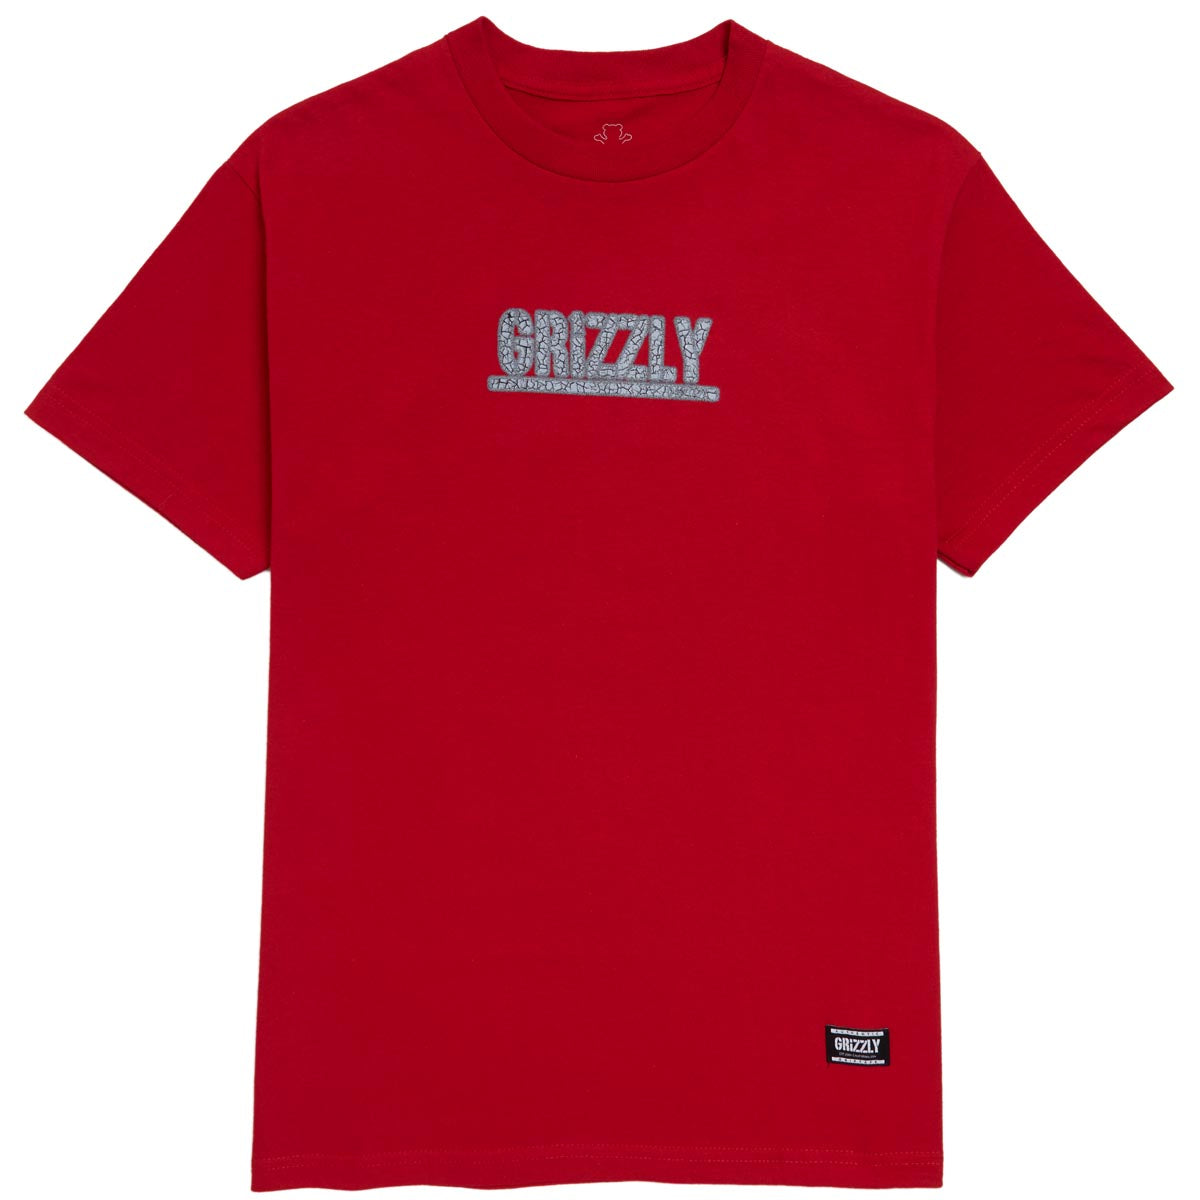 Grizzly Asphalt T-Shirt - Red image 1